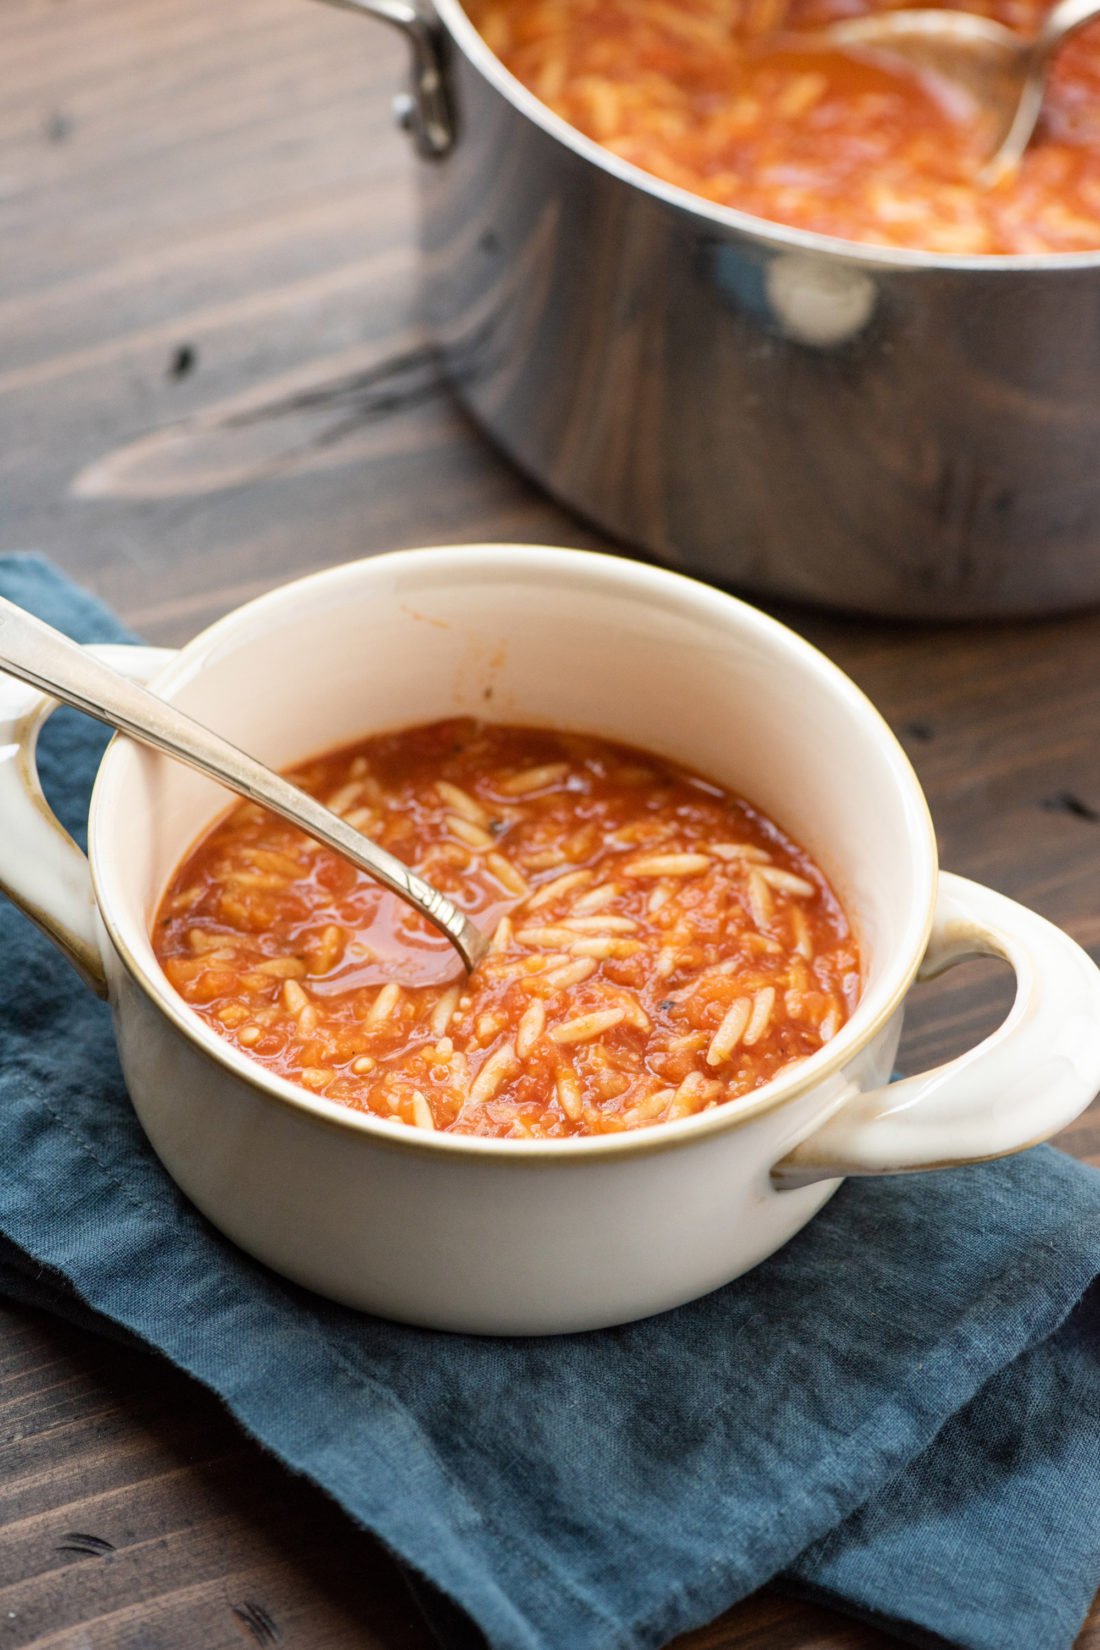 Spoon in a bowl of Tomato, Orzo and Dill Soup.